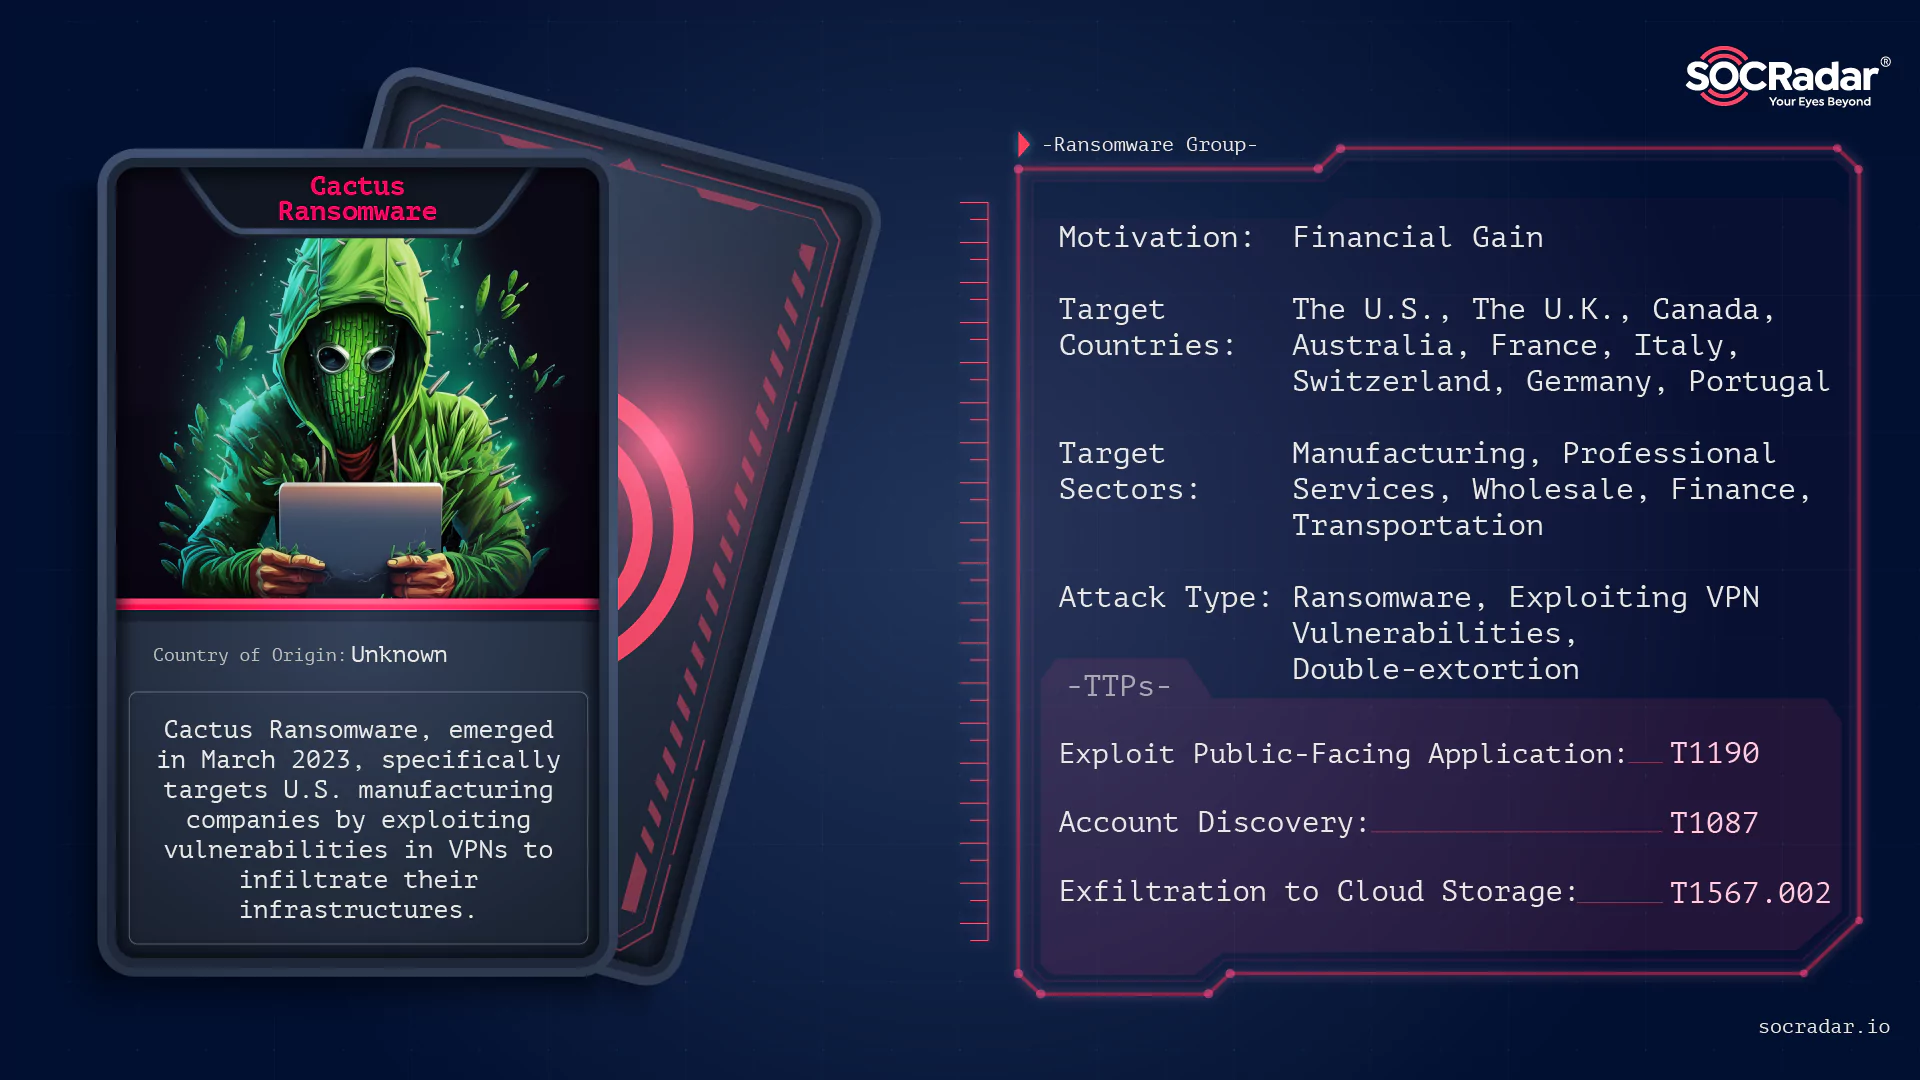 Threat actor card of Cactus Ransomware